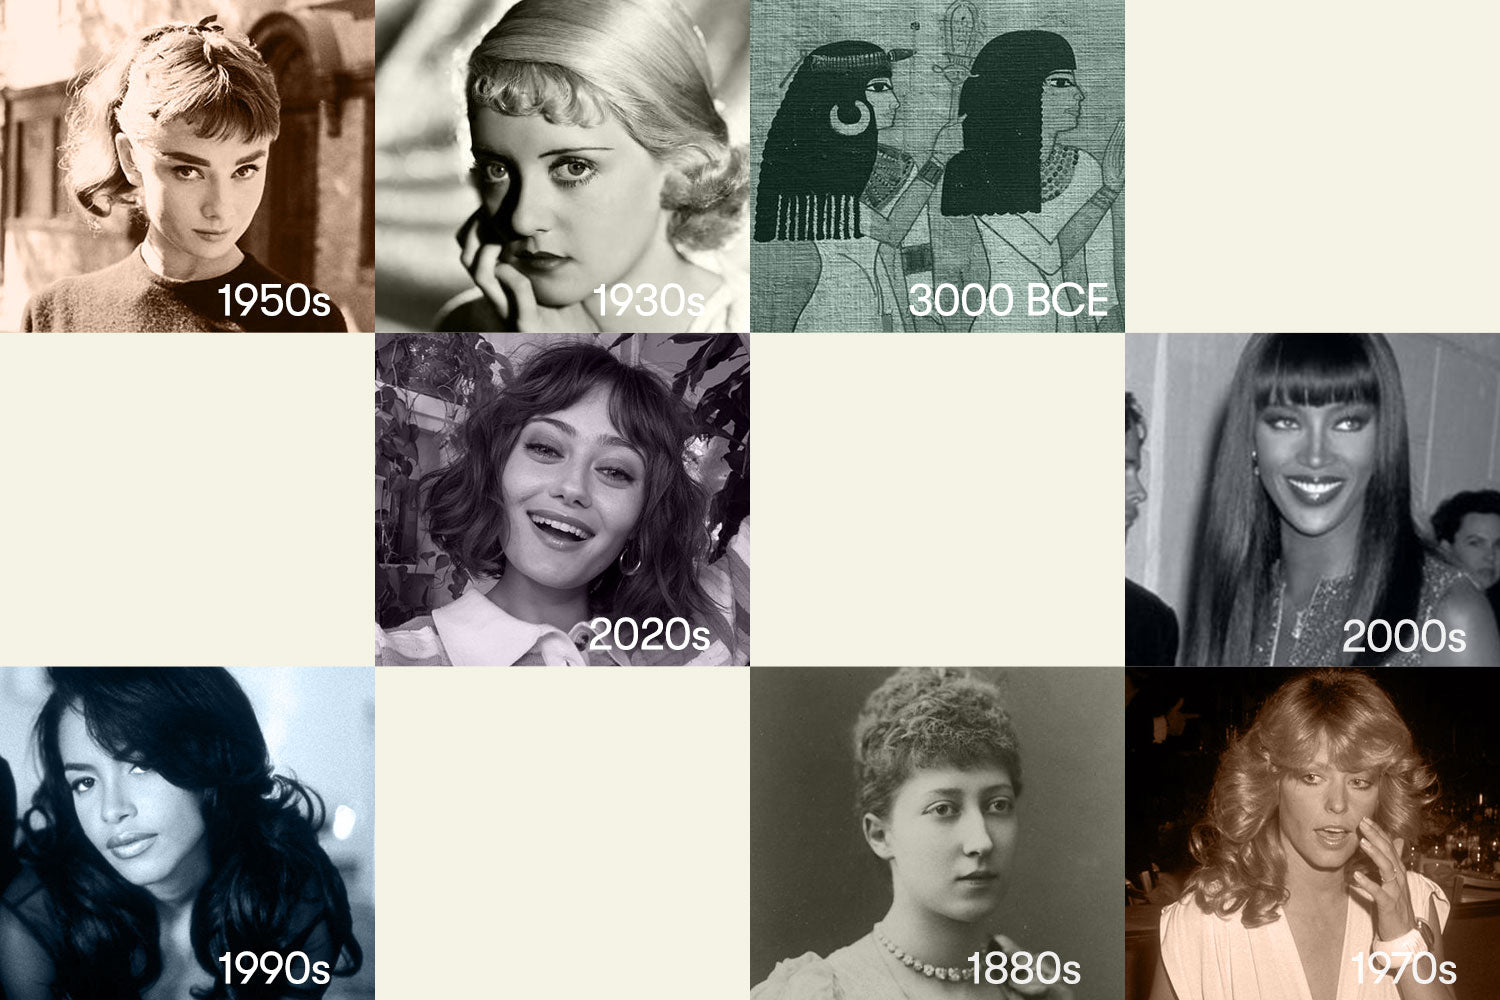 The Evolution Of Bangs Proves Just How Cyclical Hair Trends Are